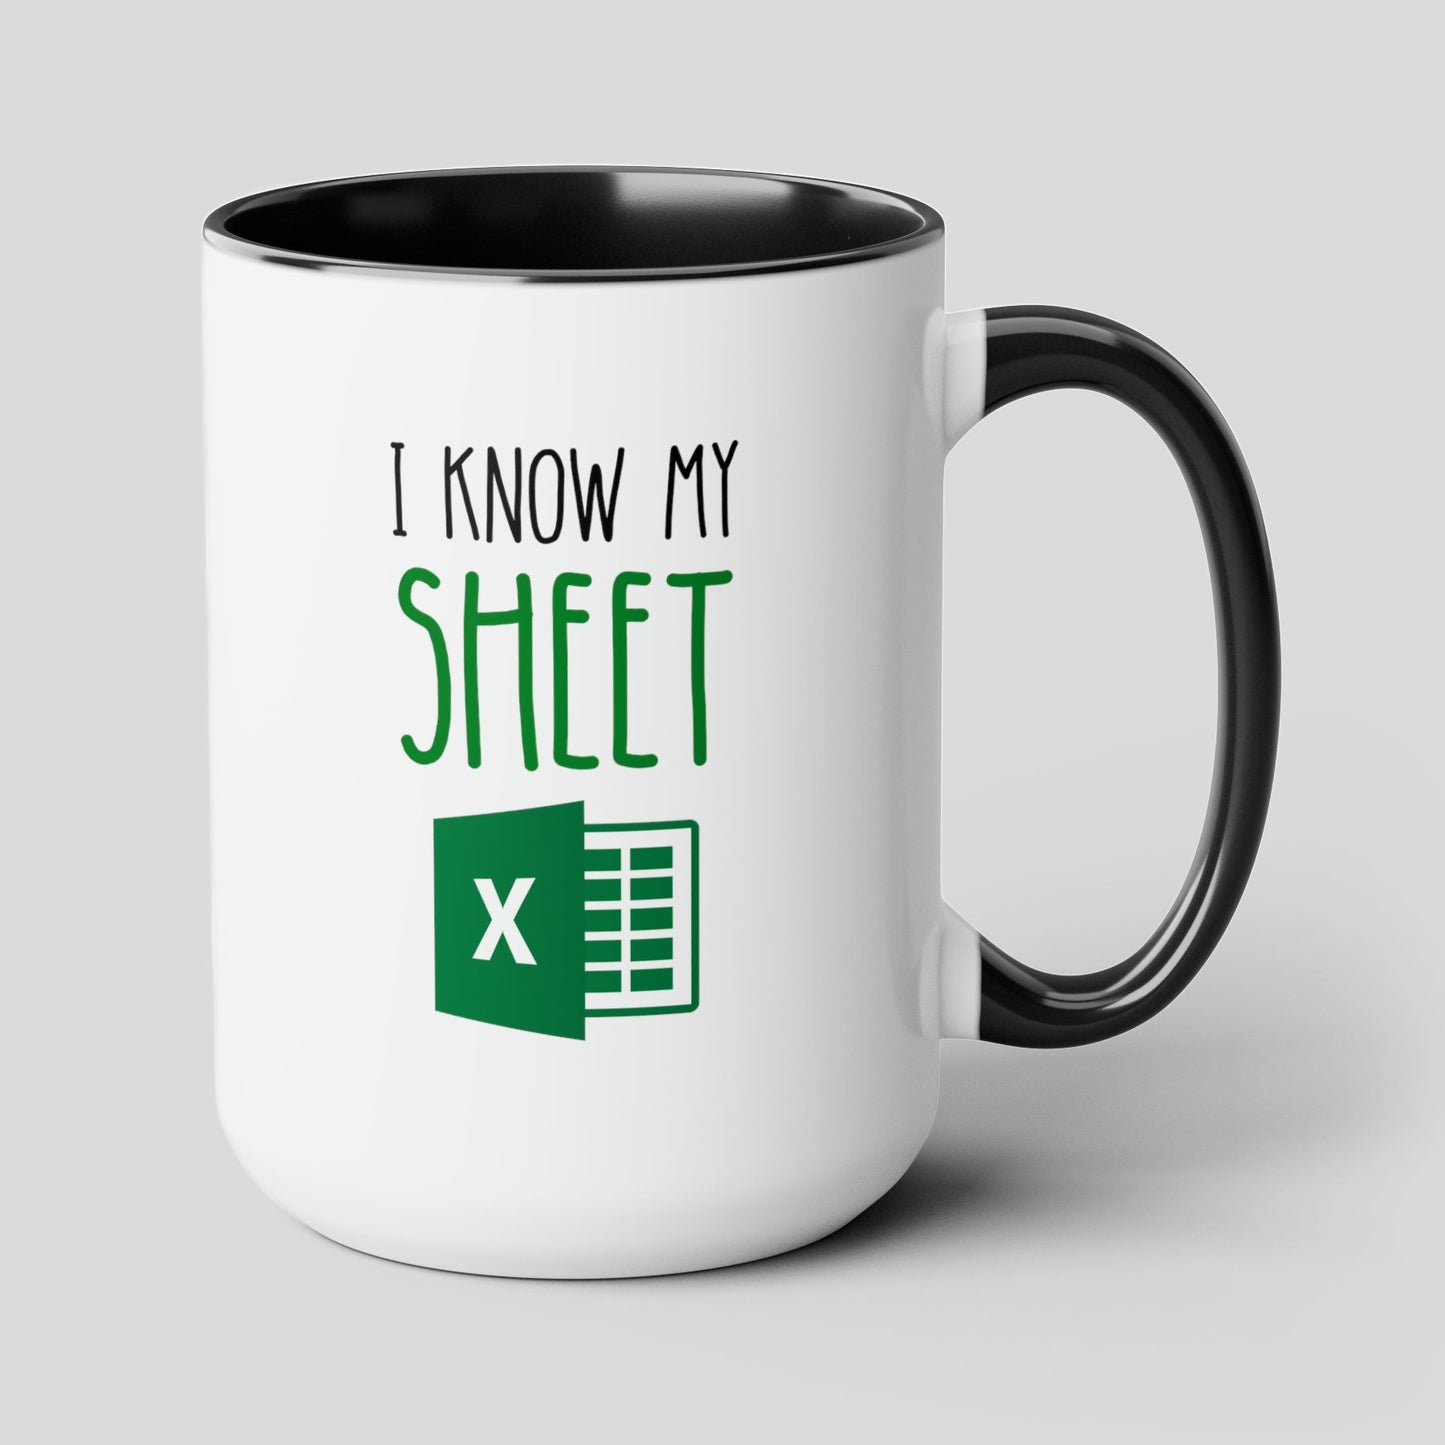 I Know My Sheet 15oz white with black accent funny large coffee mug gift for work colleague spreadsheet accountant office coworker excel waveywares wavey wares wavywares wavy wares cover